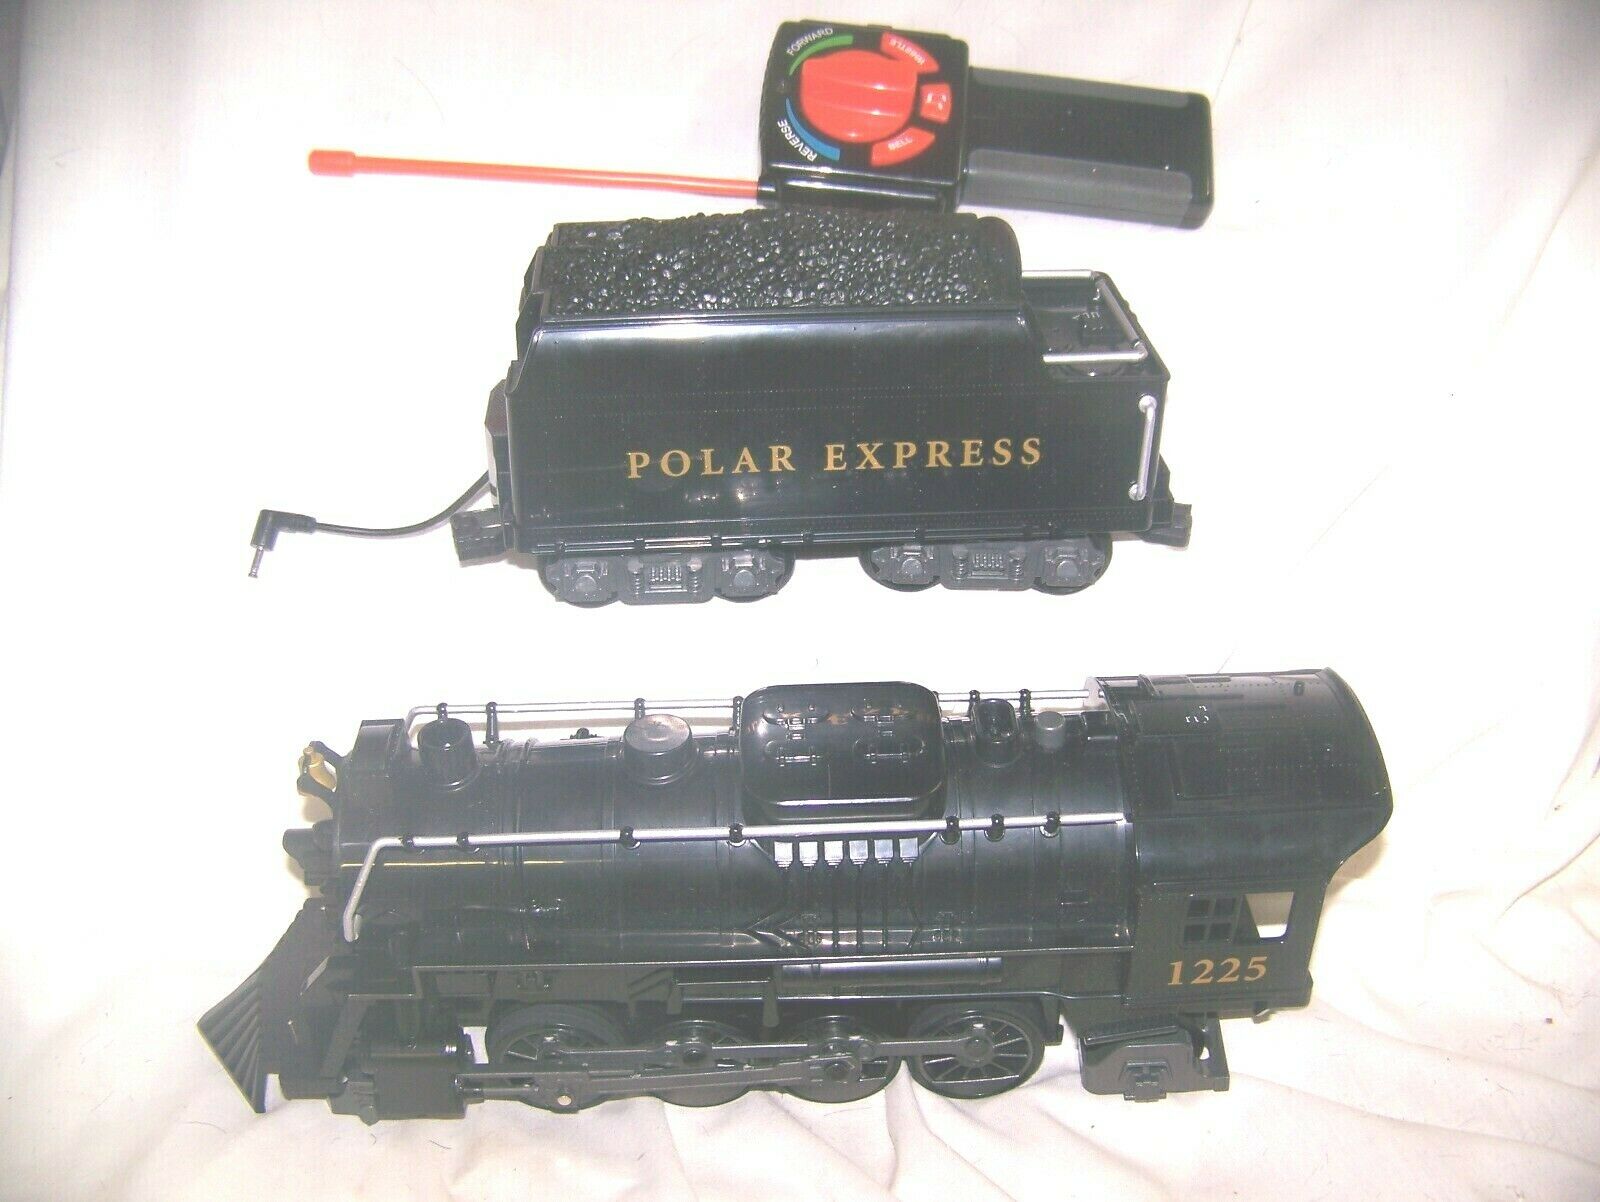 Lionel G Scale Polar Express Locomotive, Tender, Remote, Batteries, All Tested